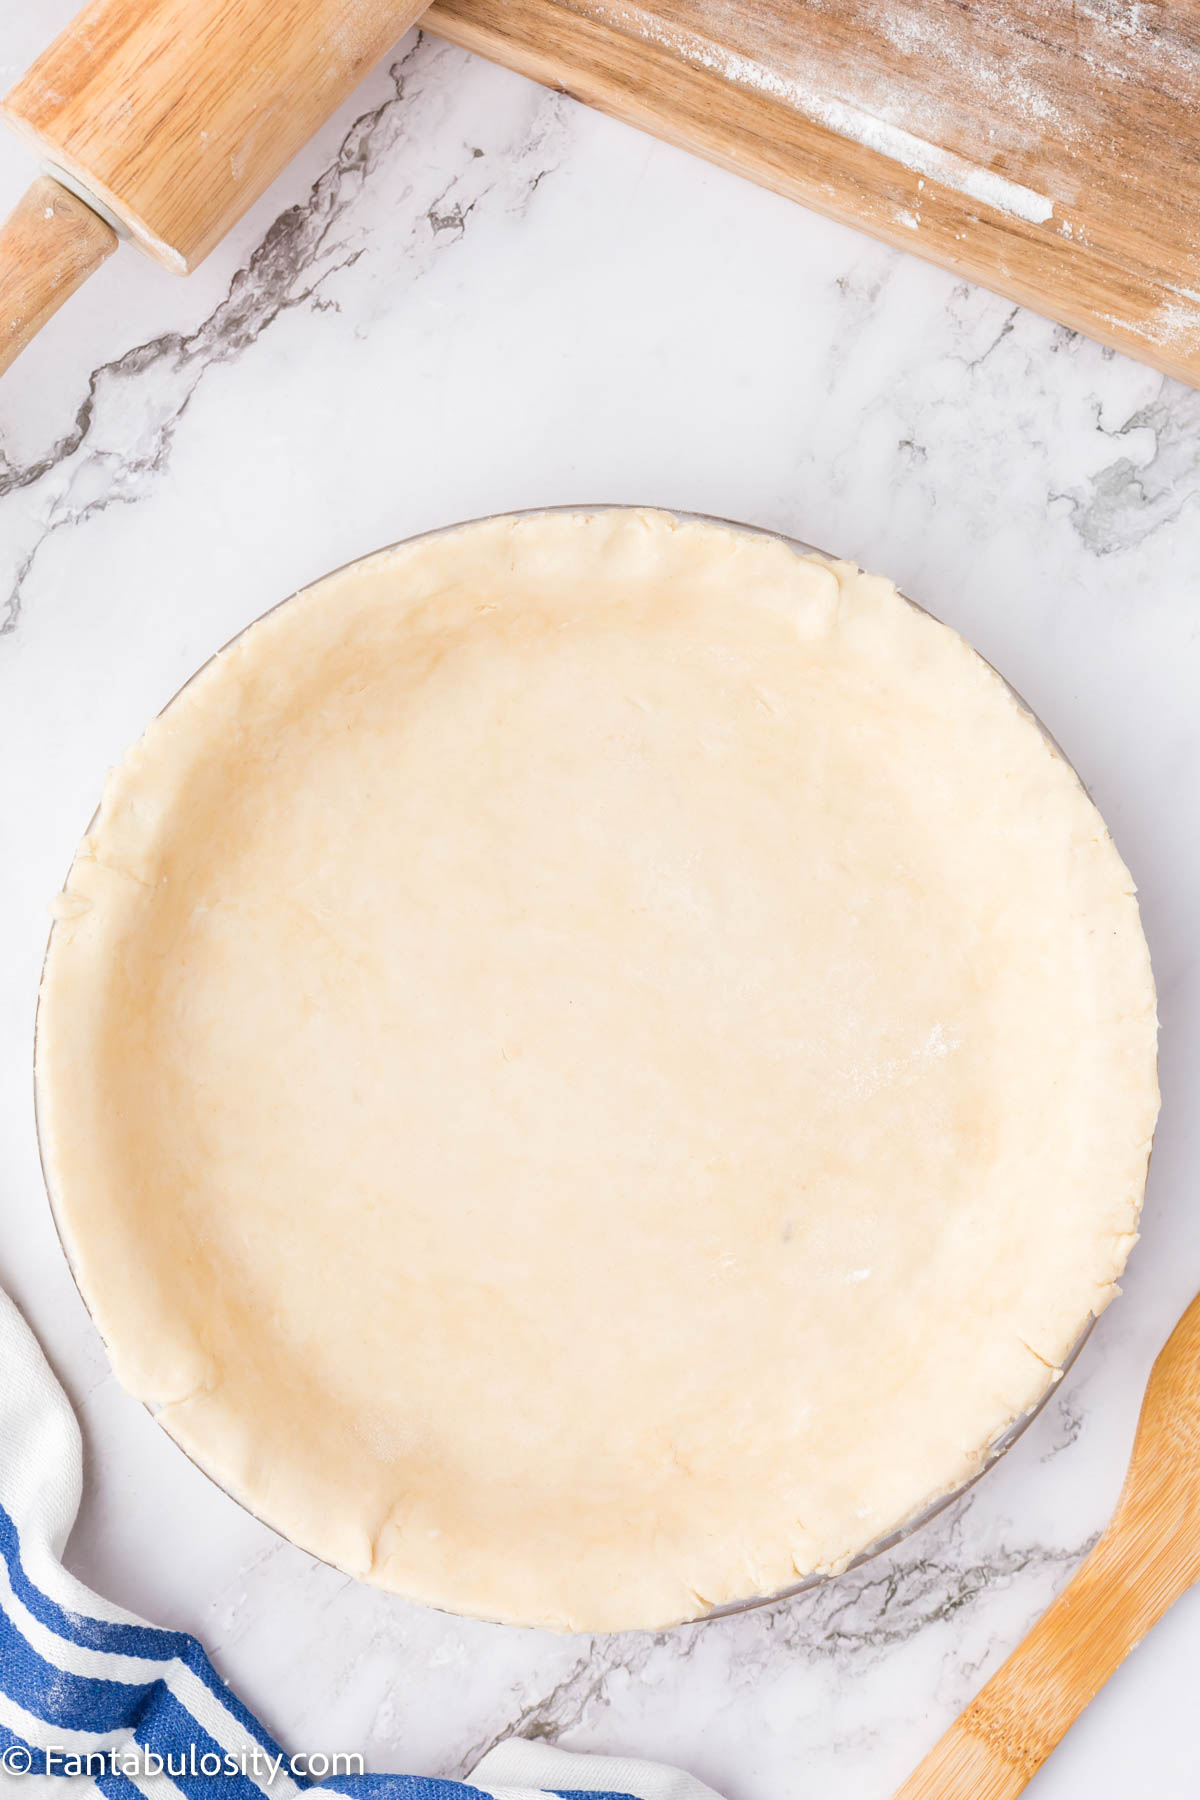 A neatly trimmed pie crust pressed into a pie plate. The edges are trimmed.